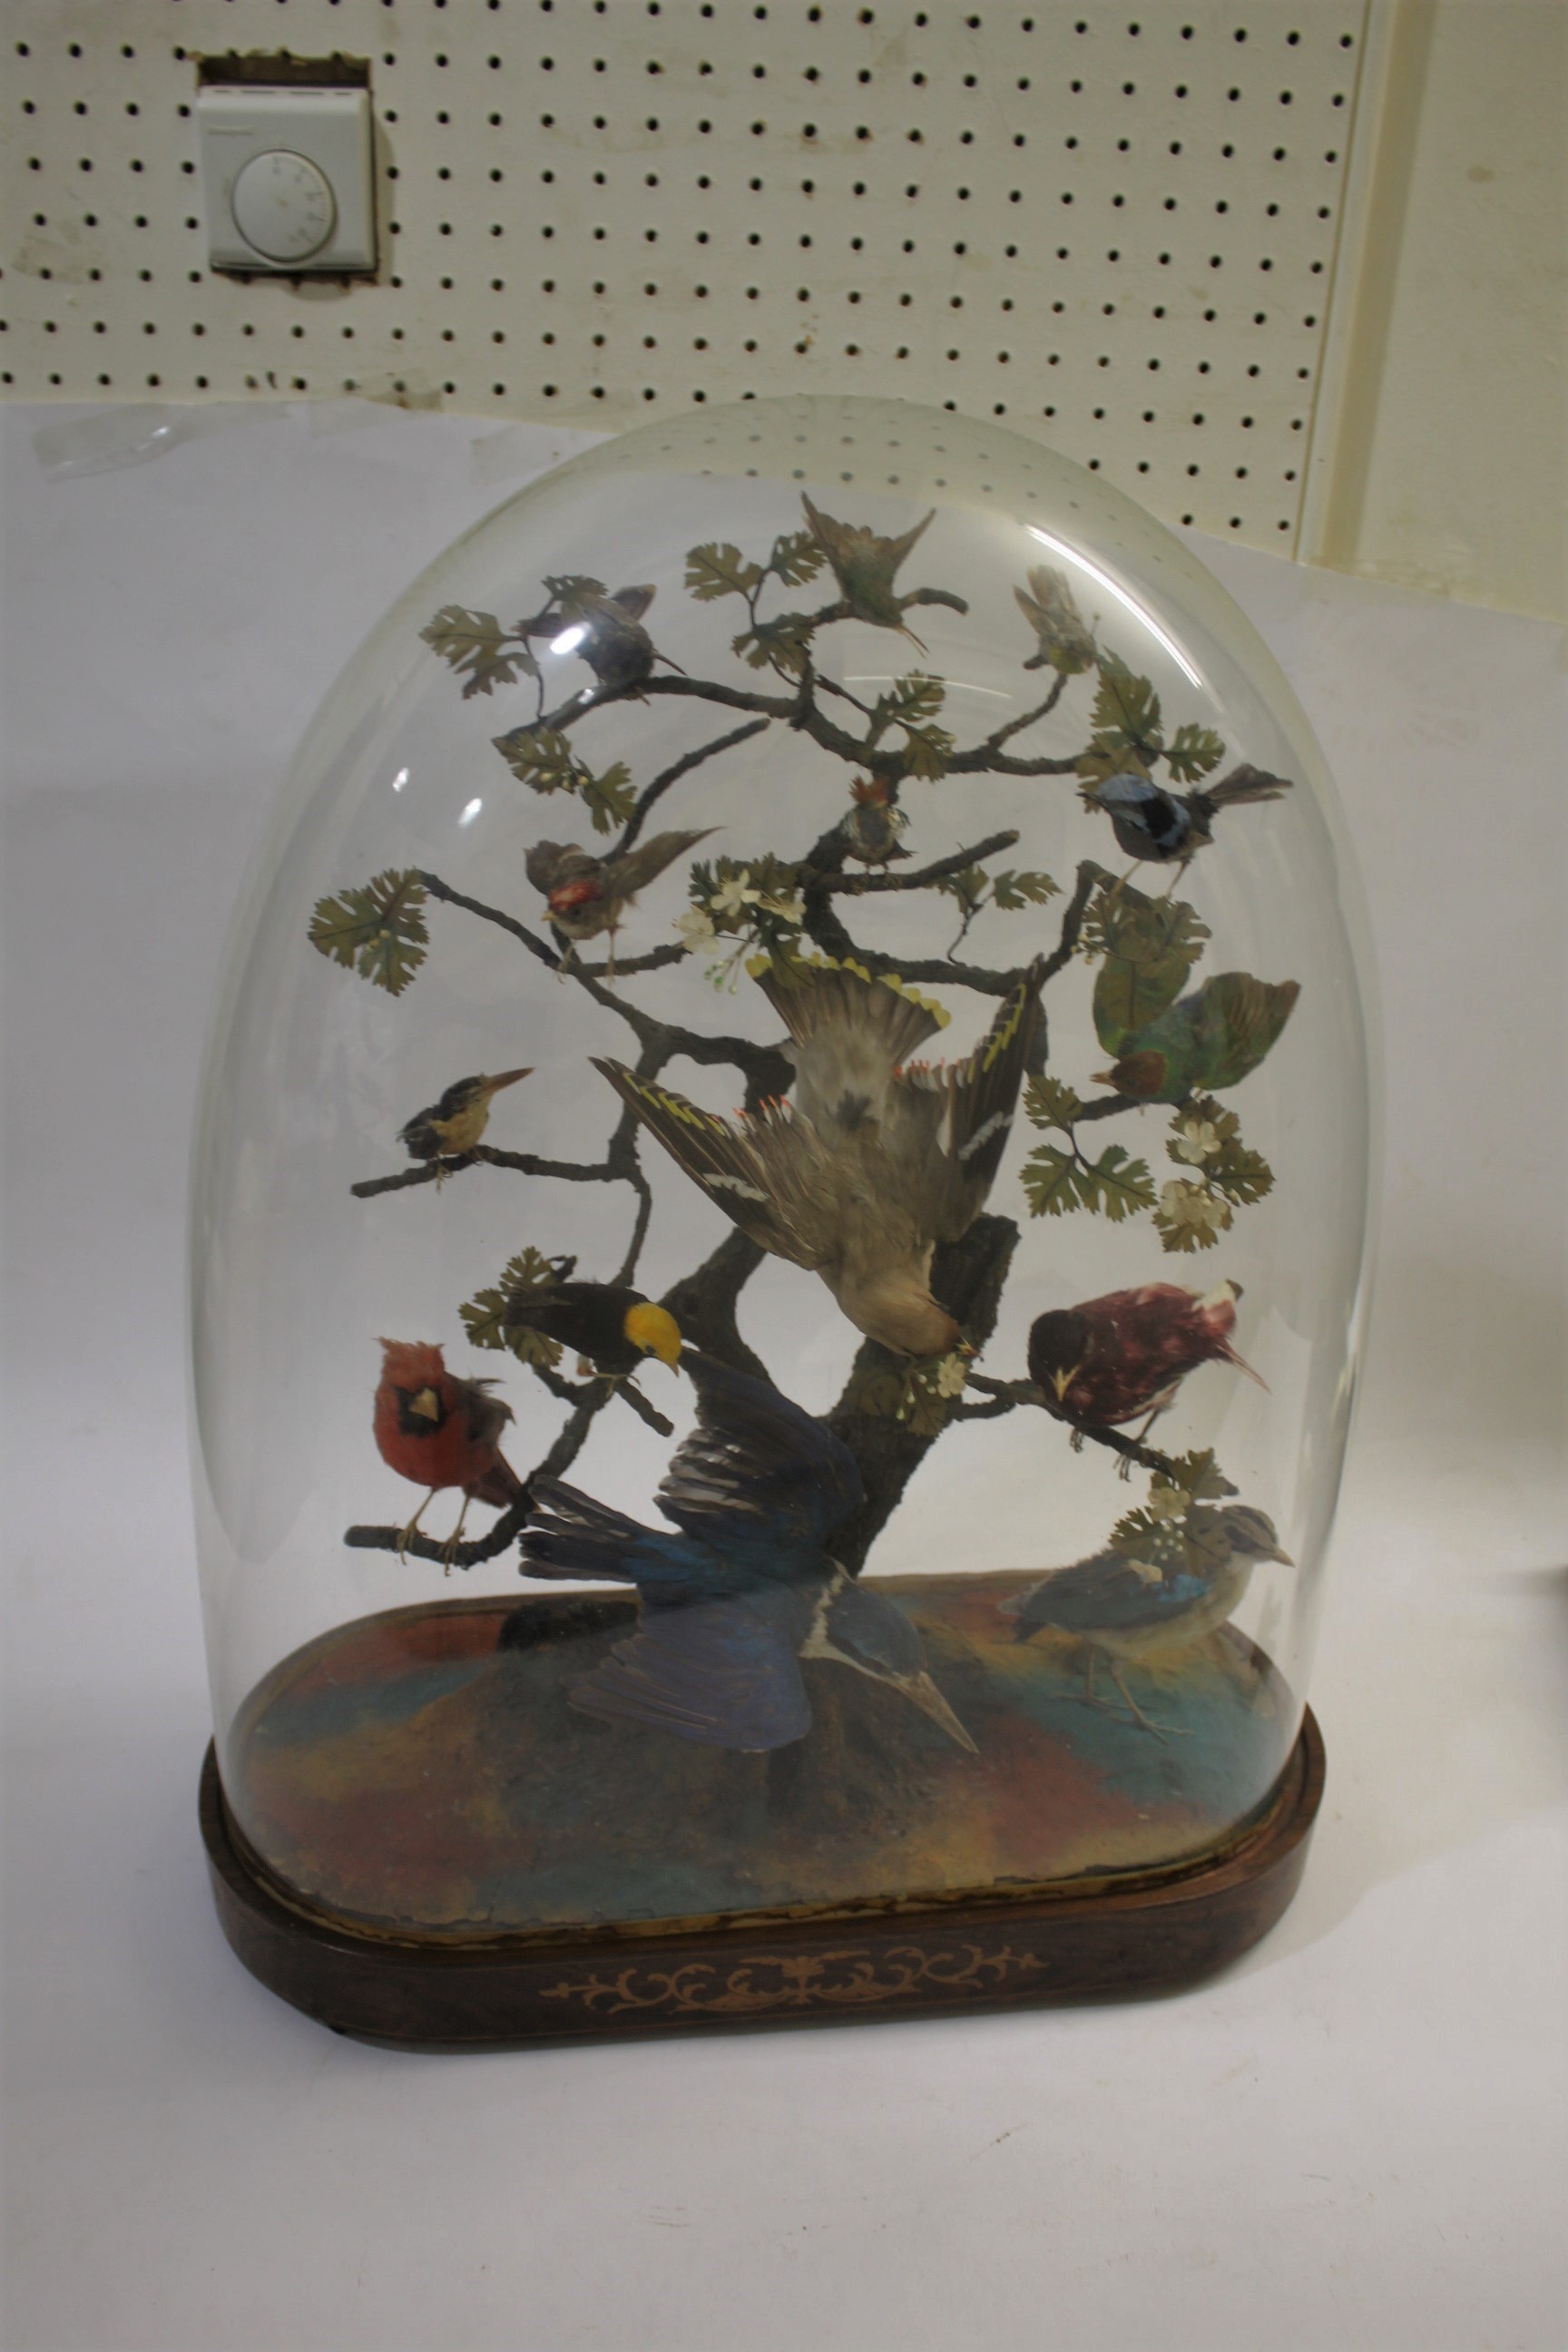 BIRD DIORAMA - GLASS DOME a diorama of various exotic birds mounted on a simulated tree branch. With - Image 2 of 15